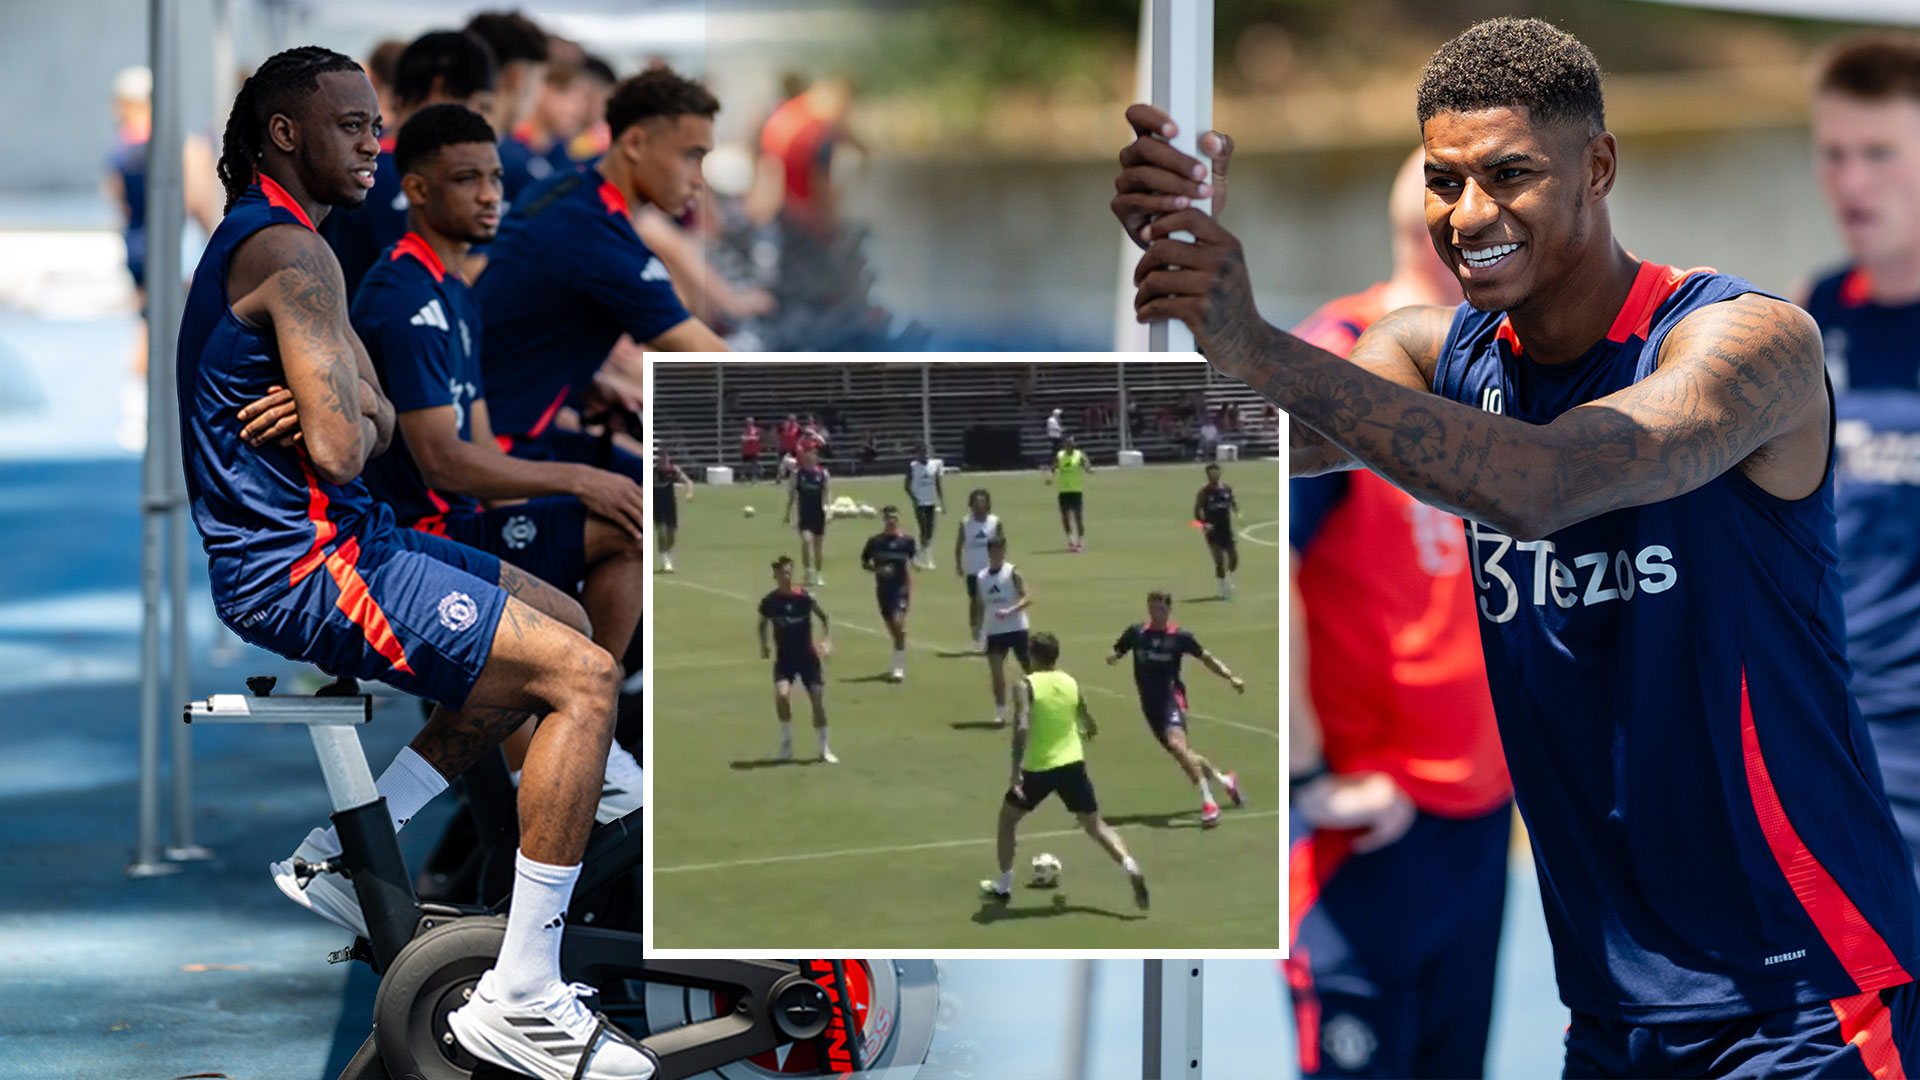 Man Utd fans say ‘we’re winning the league’ as footage of incredible rondo training drill goes viral [Video]